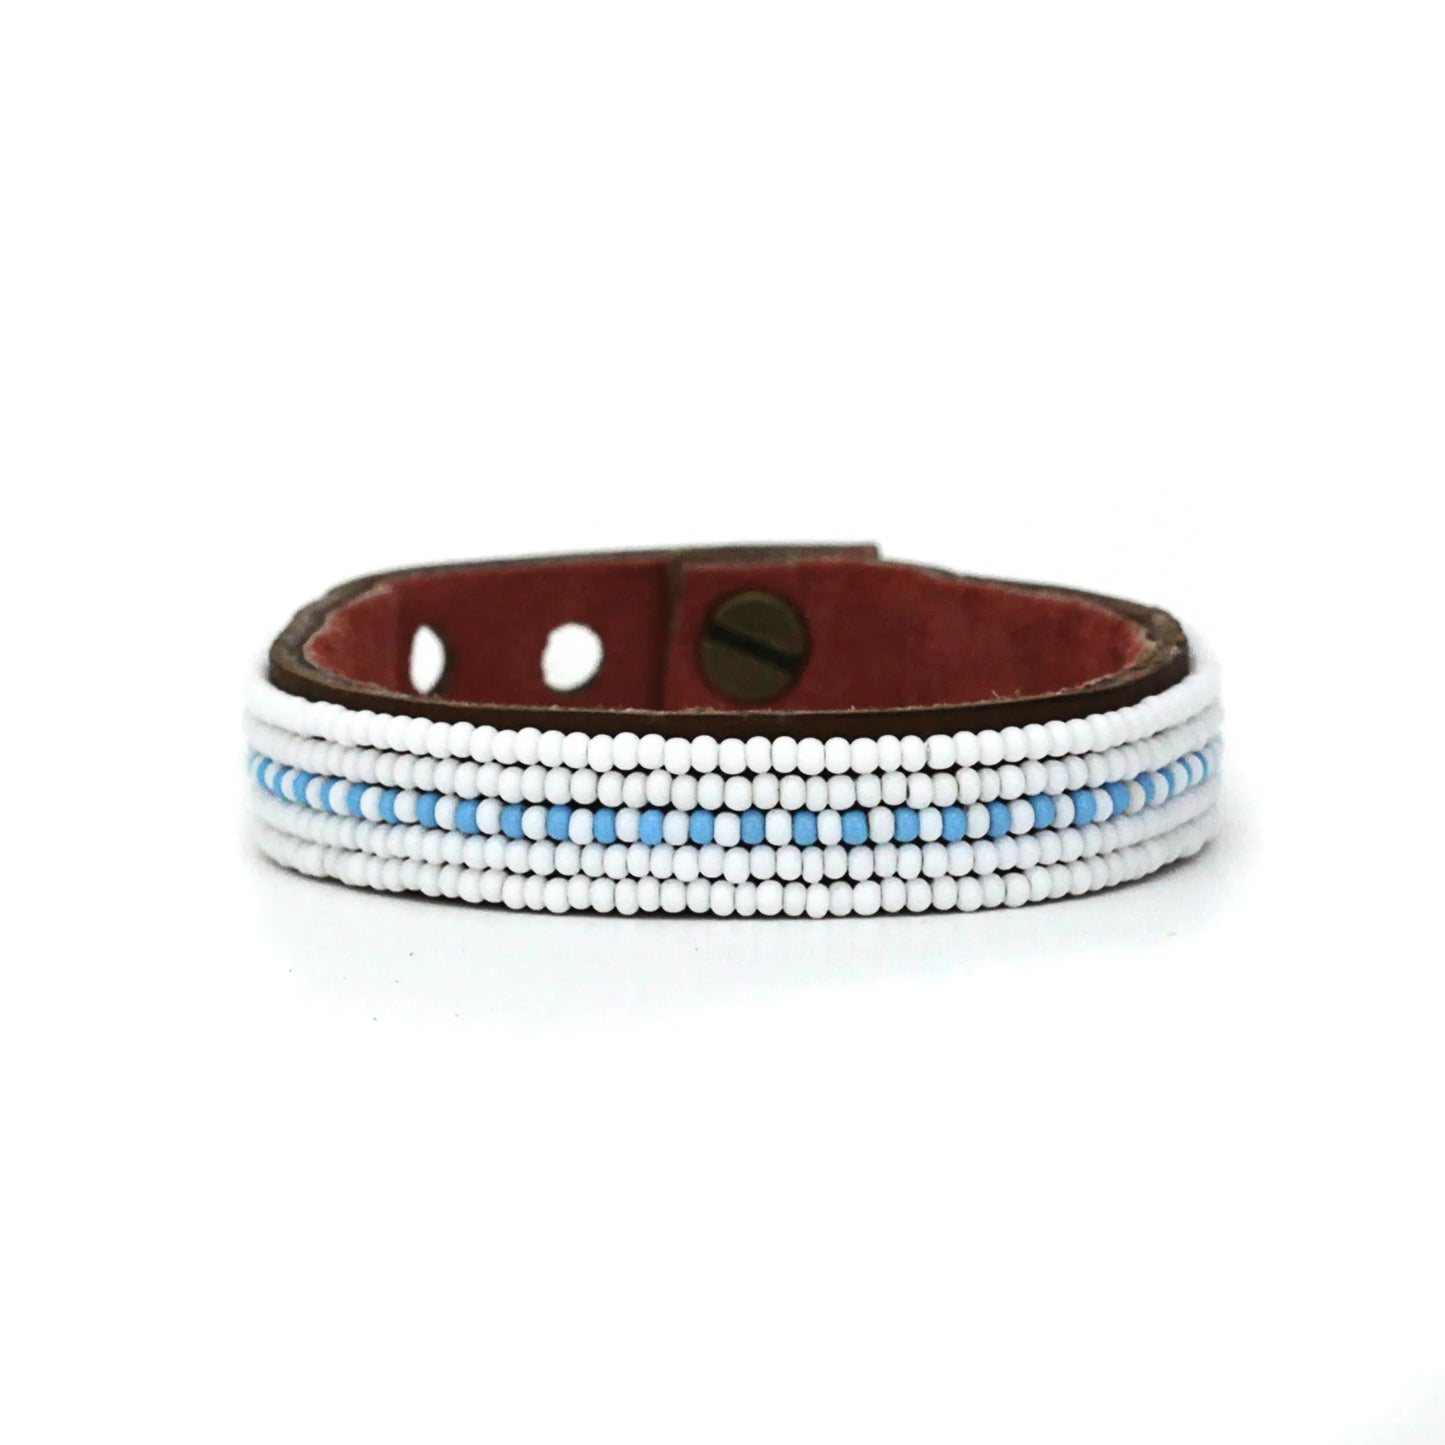 Small Beaded Leather Cuff